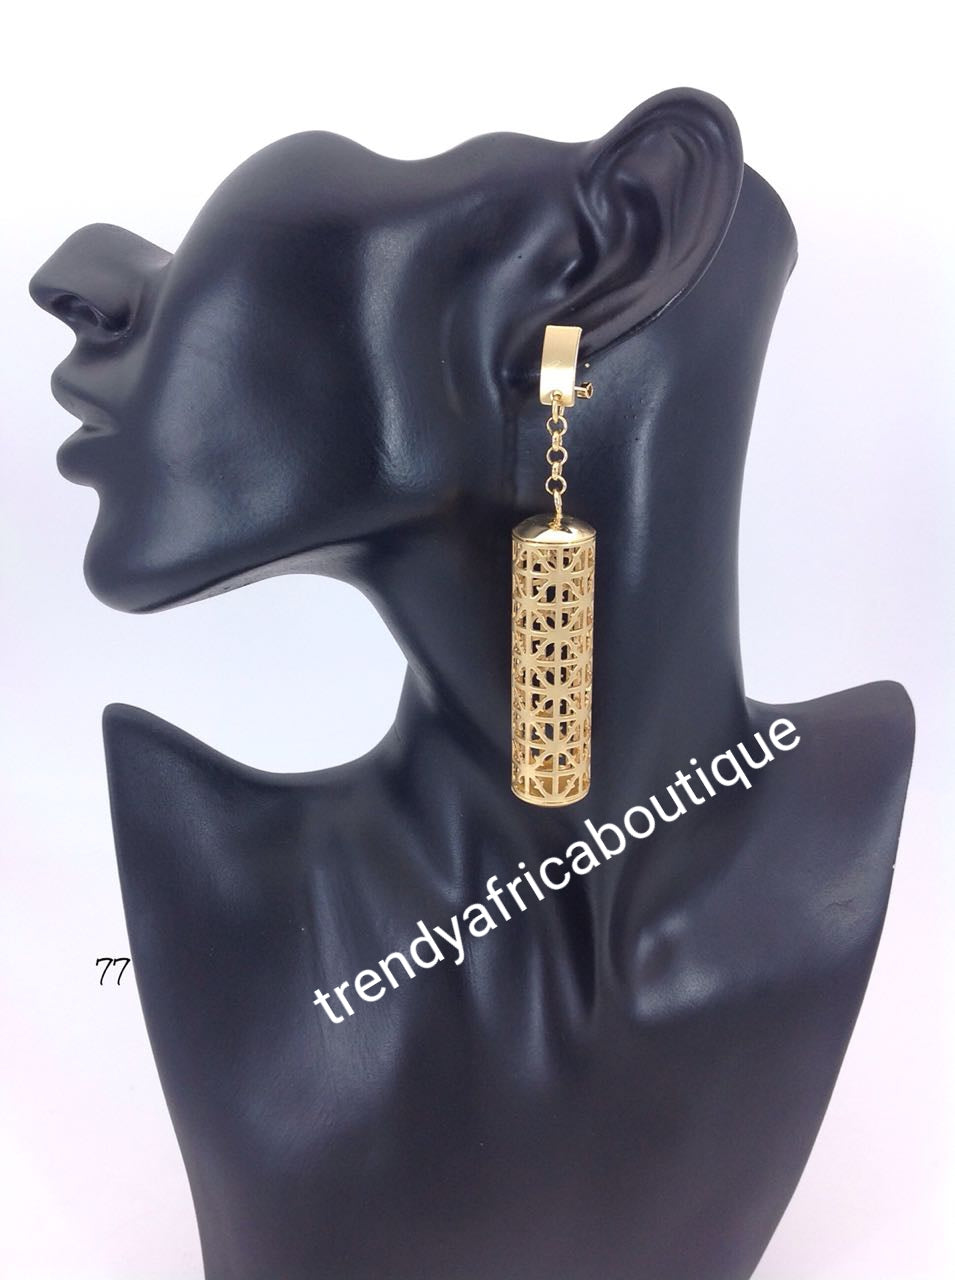 Latest drop-earrings in gold electroplating. Top quality made hypoallergenic. Long lasting. Light weight earrings